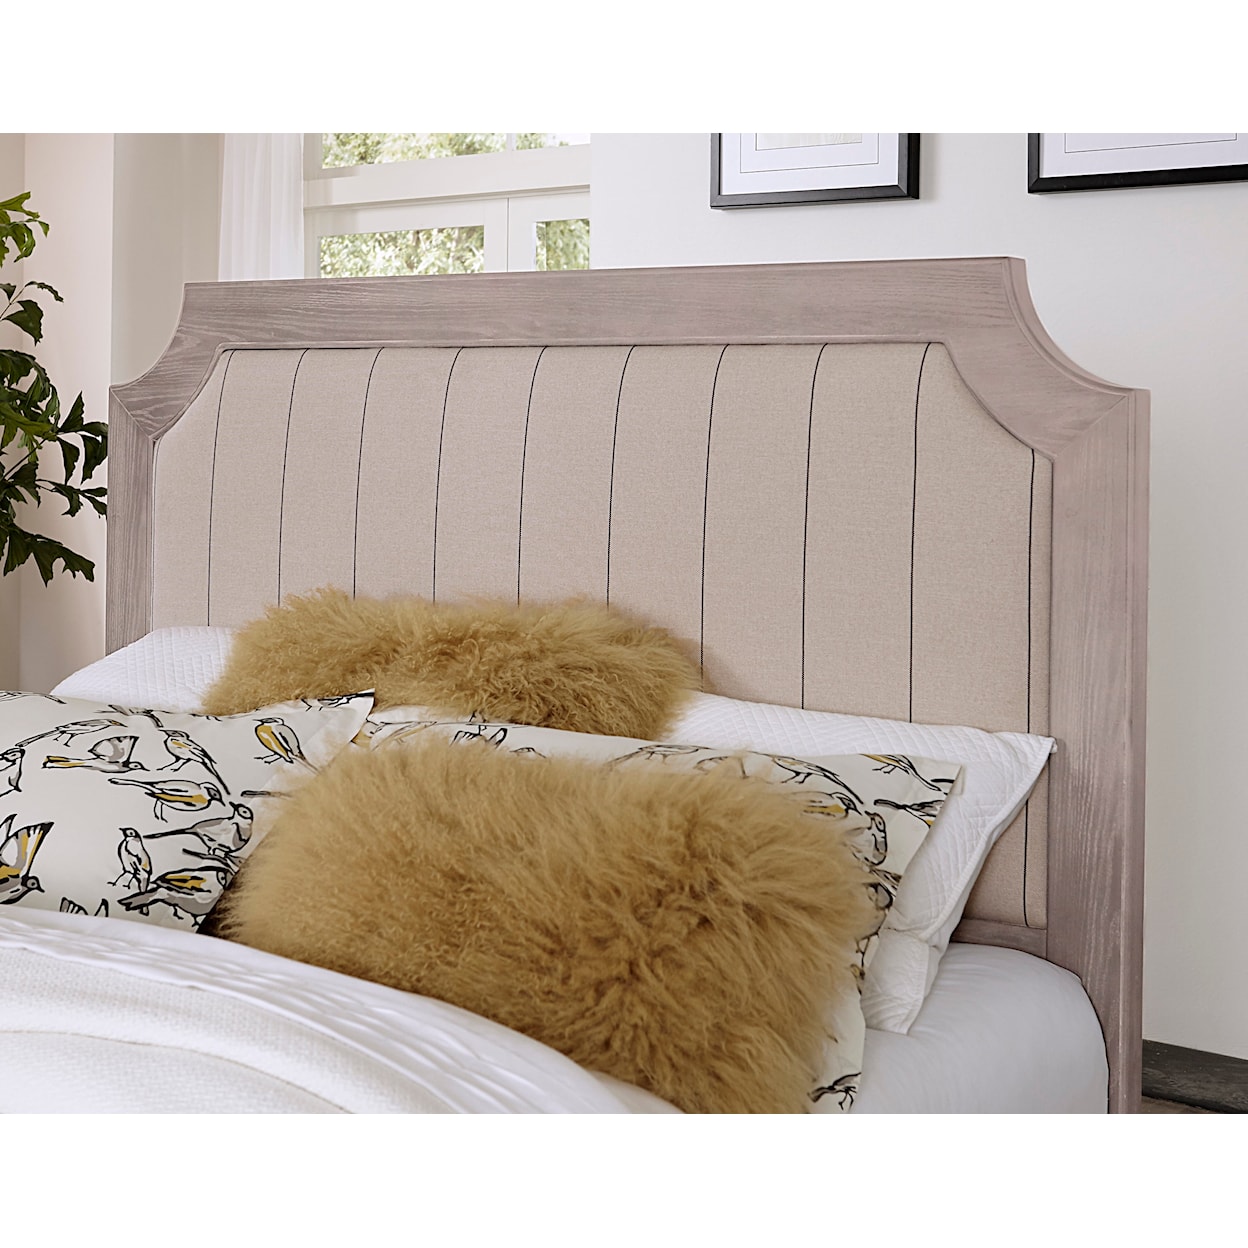 Laurel Mercantile Co. Bungalow King Upholstered Bed